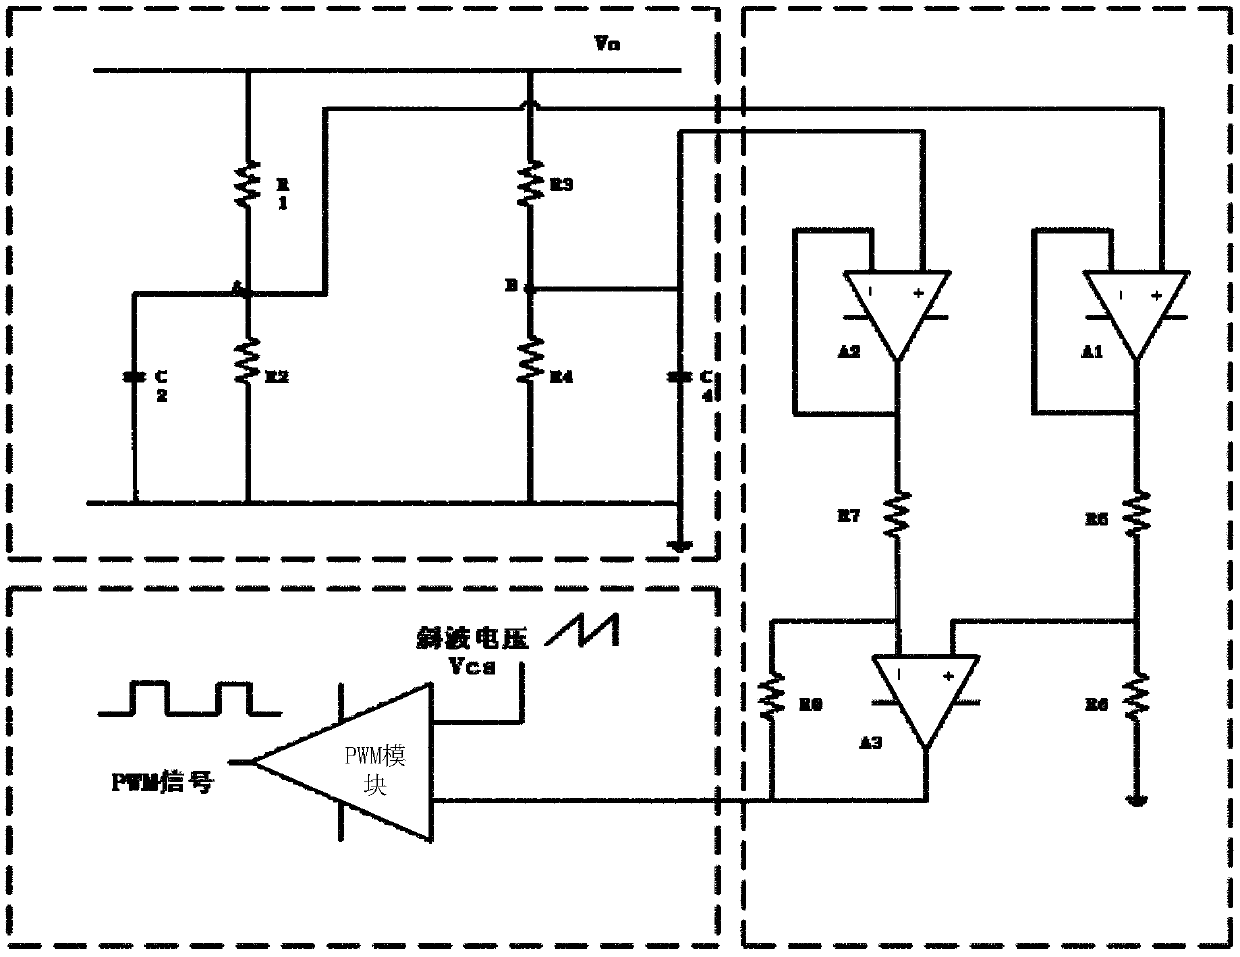 Voltage differential sampling circuit and control circuit of switching converter